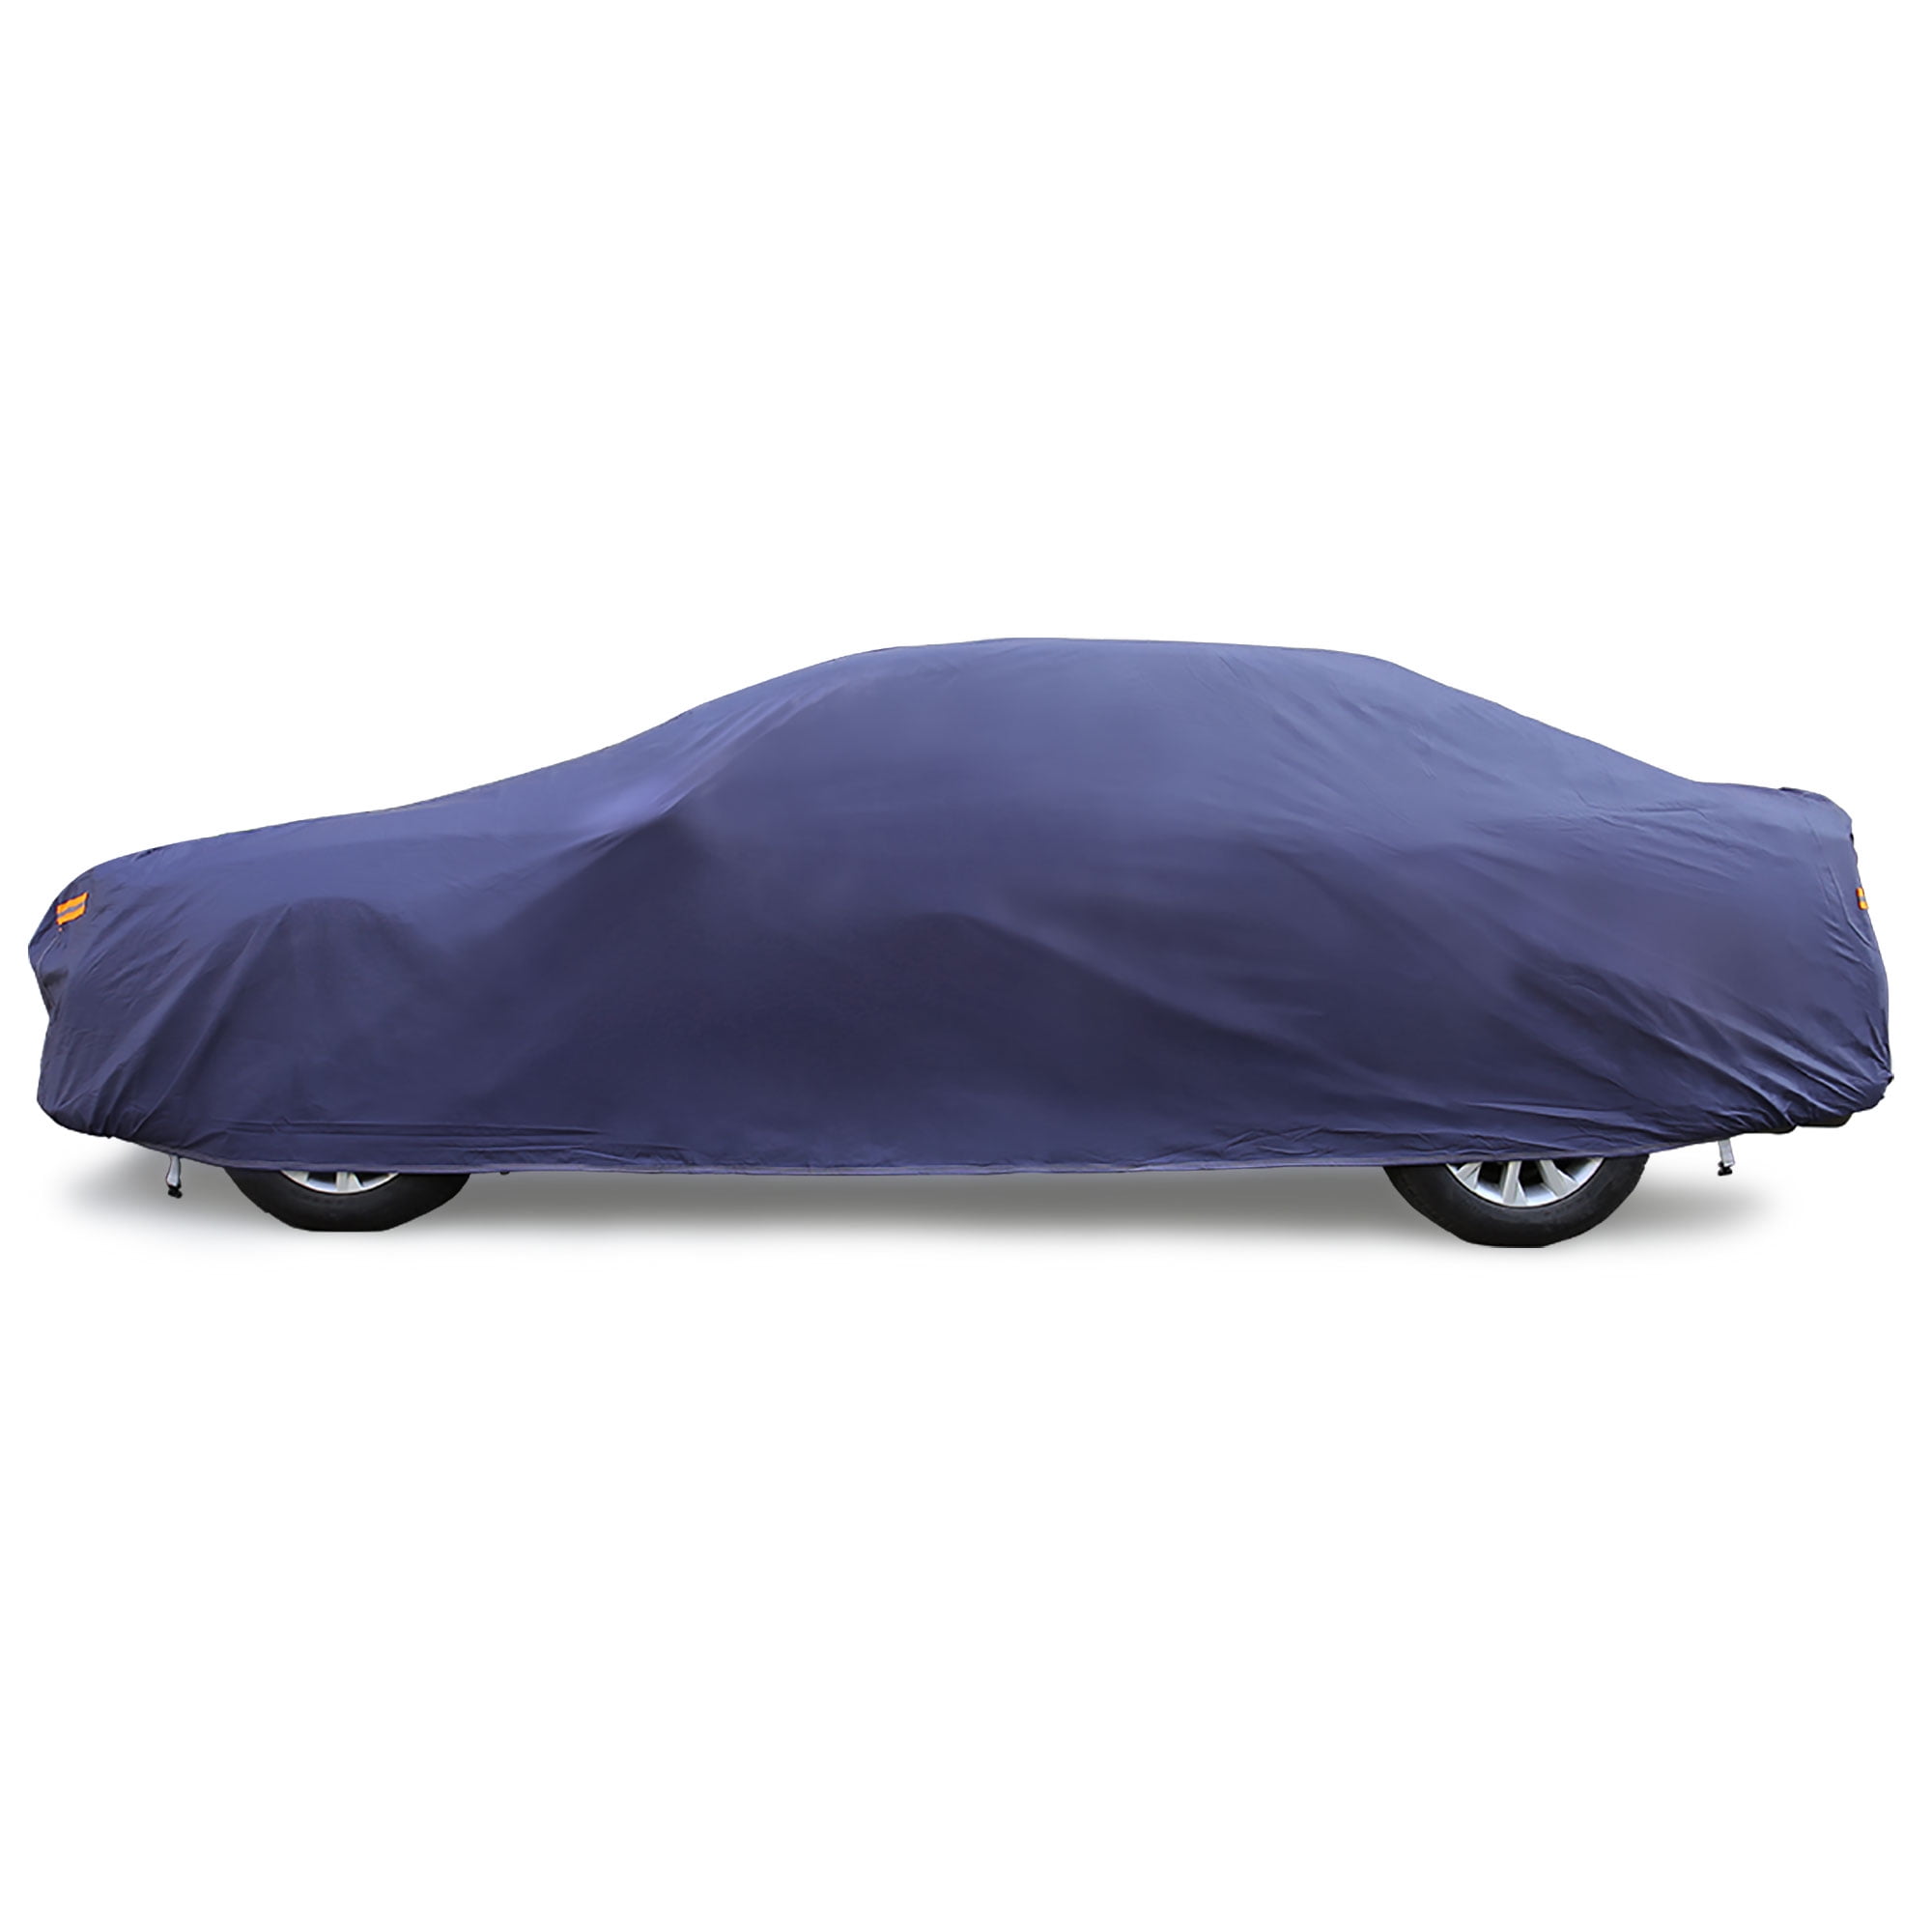 Cawanerl Thicken Car Cover Waterproof Sun Snow Rain Protection